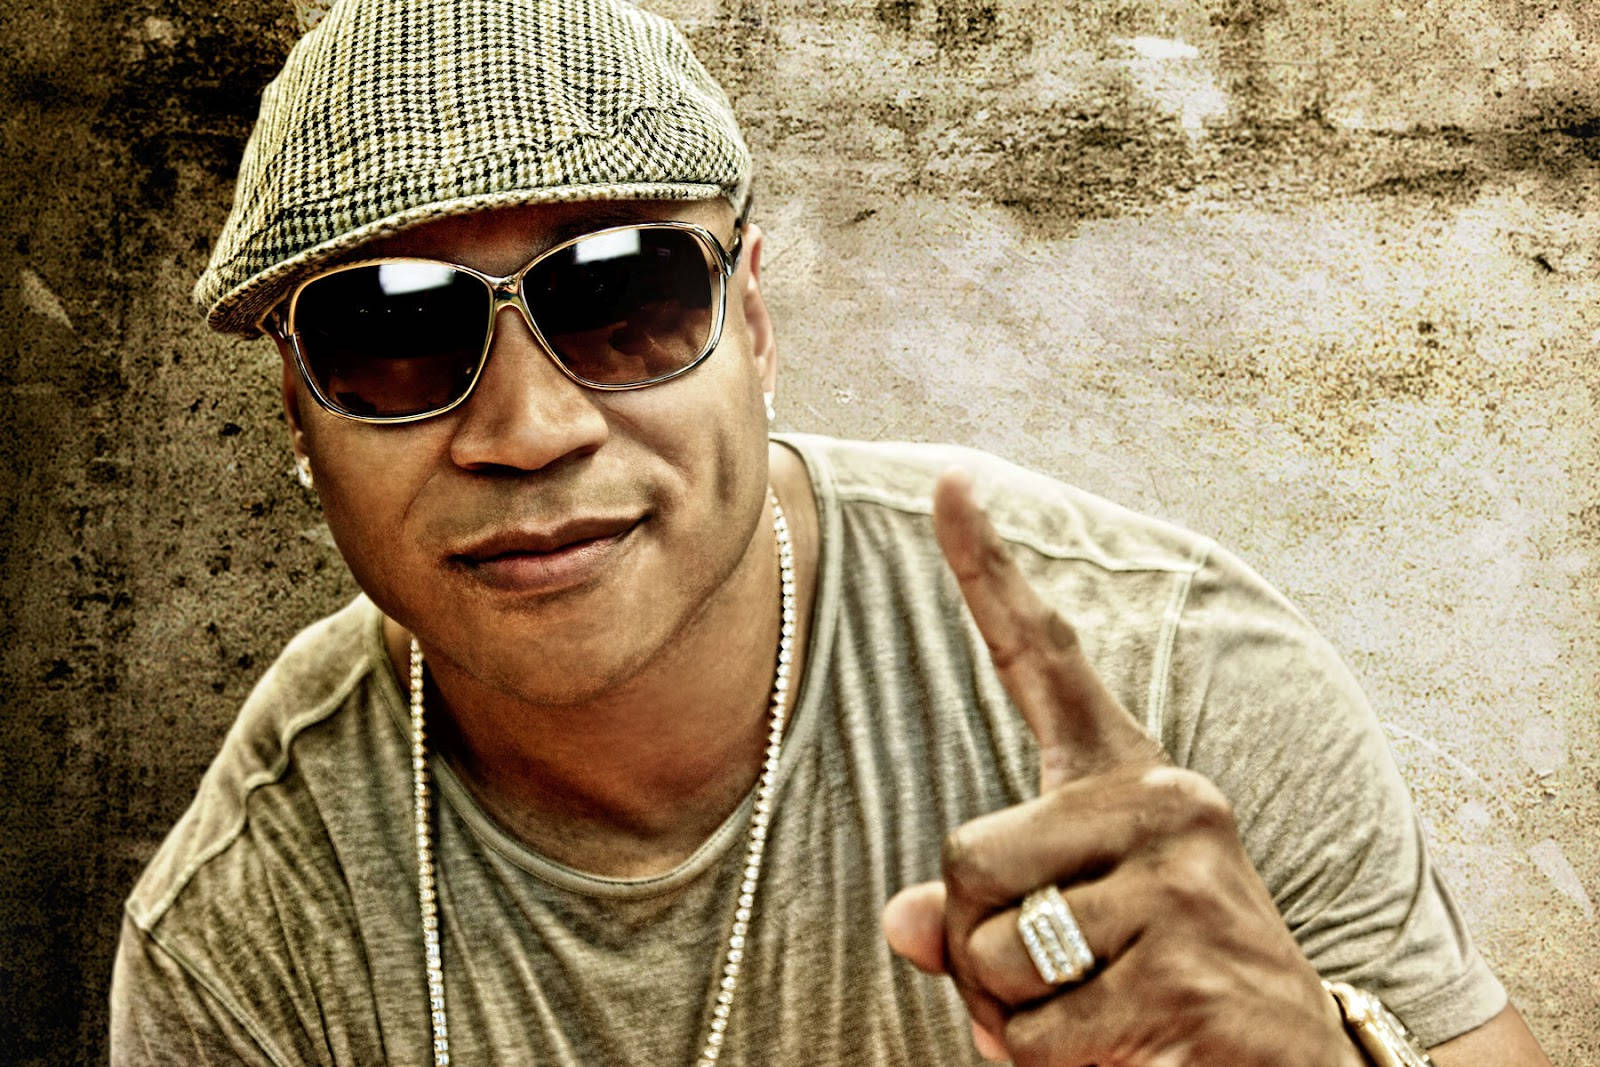 American Rapper LL Cool J - Iconic Grungy Photoshoot Wallpaper